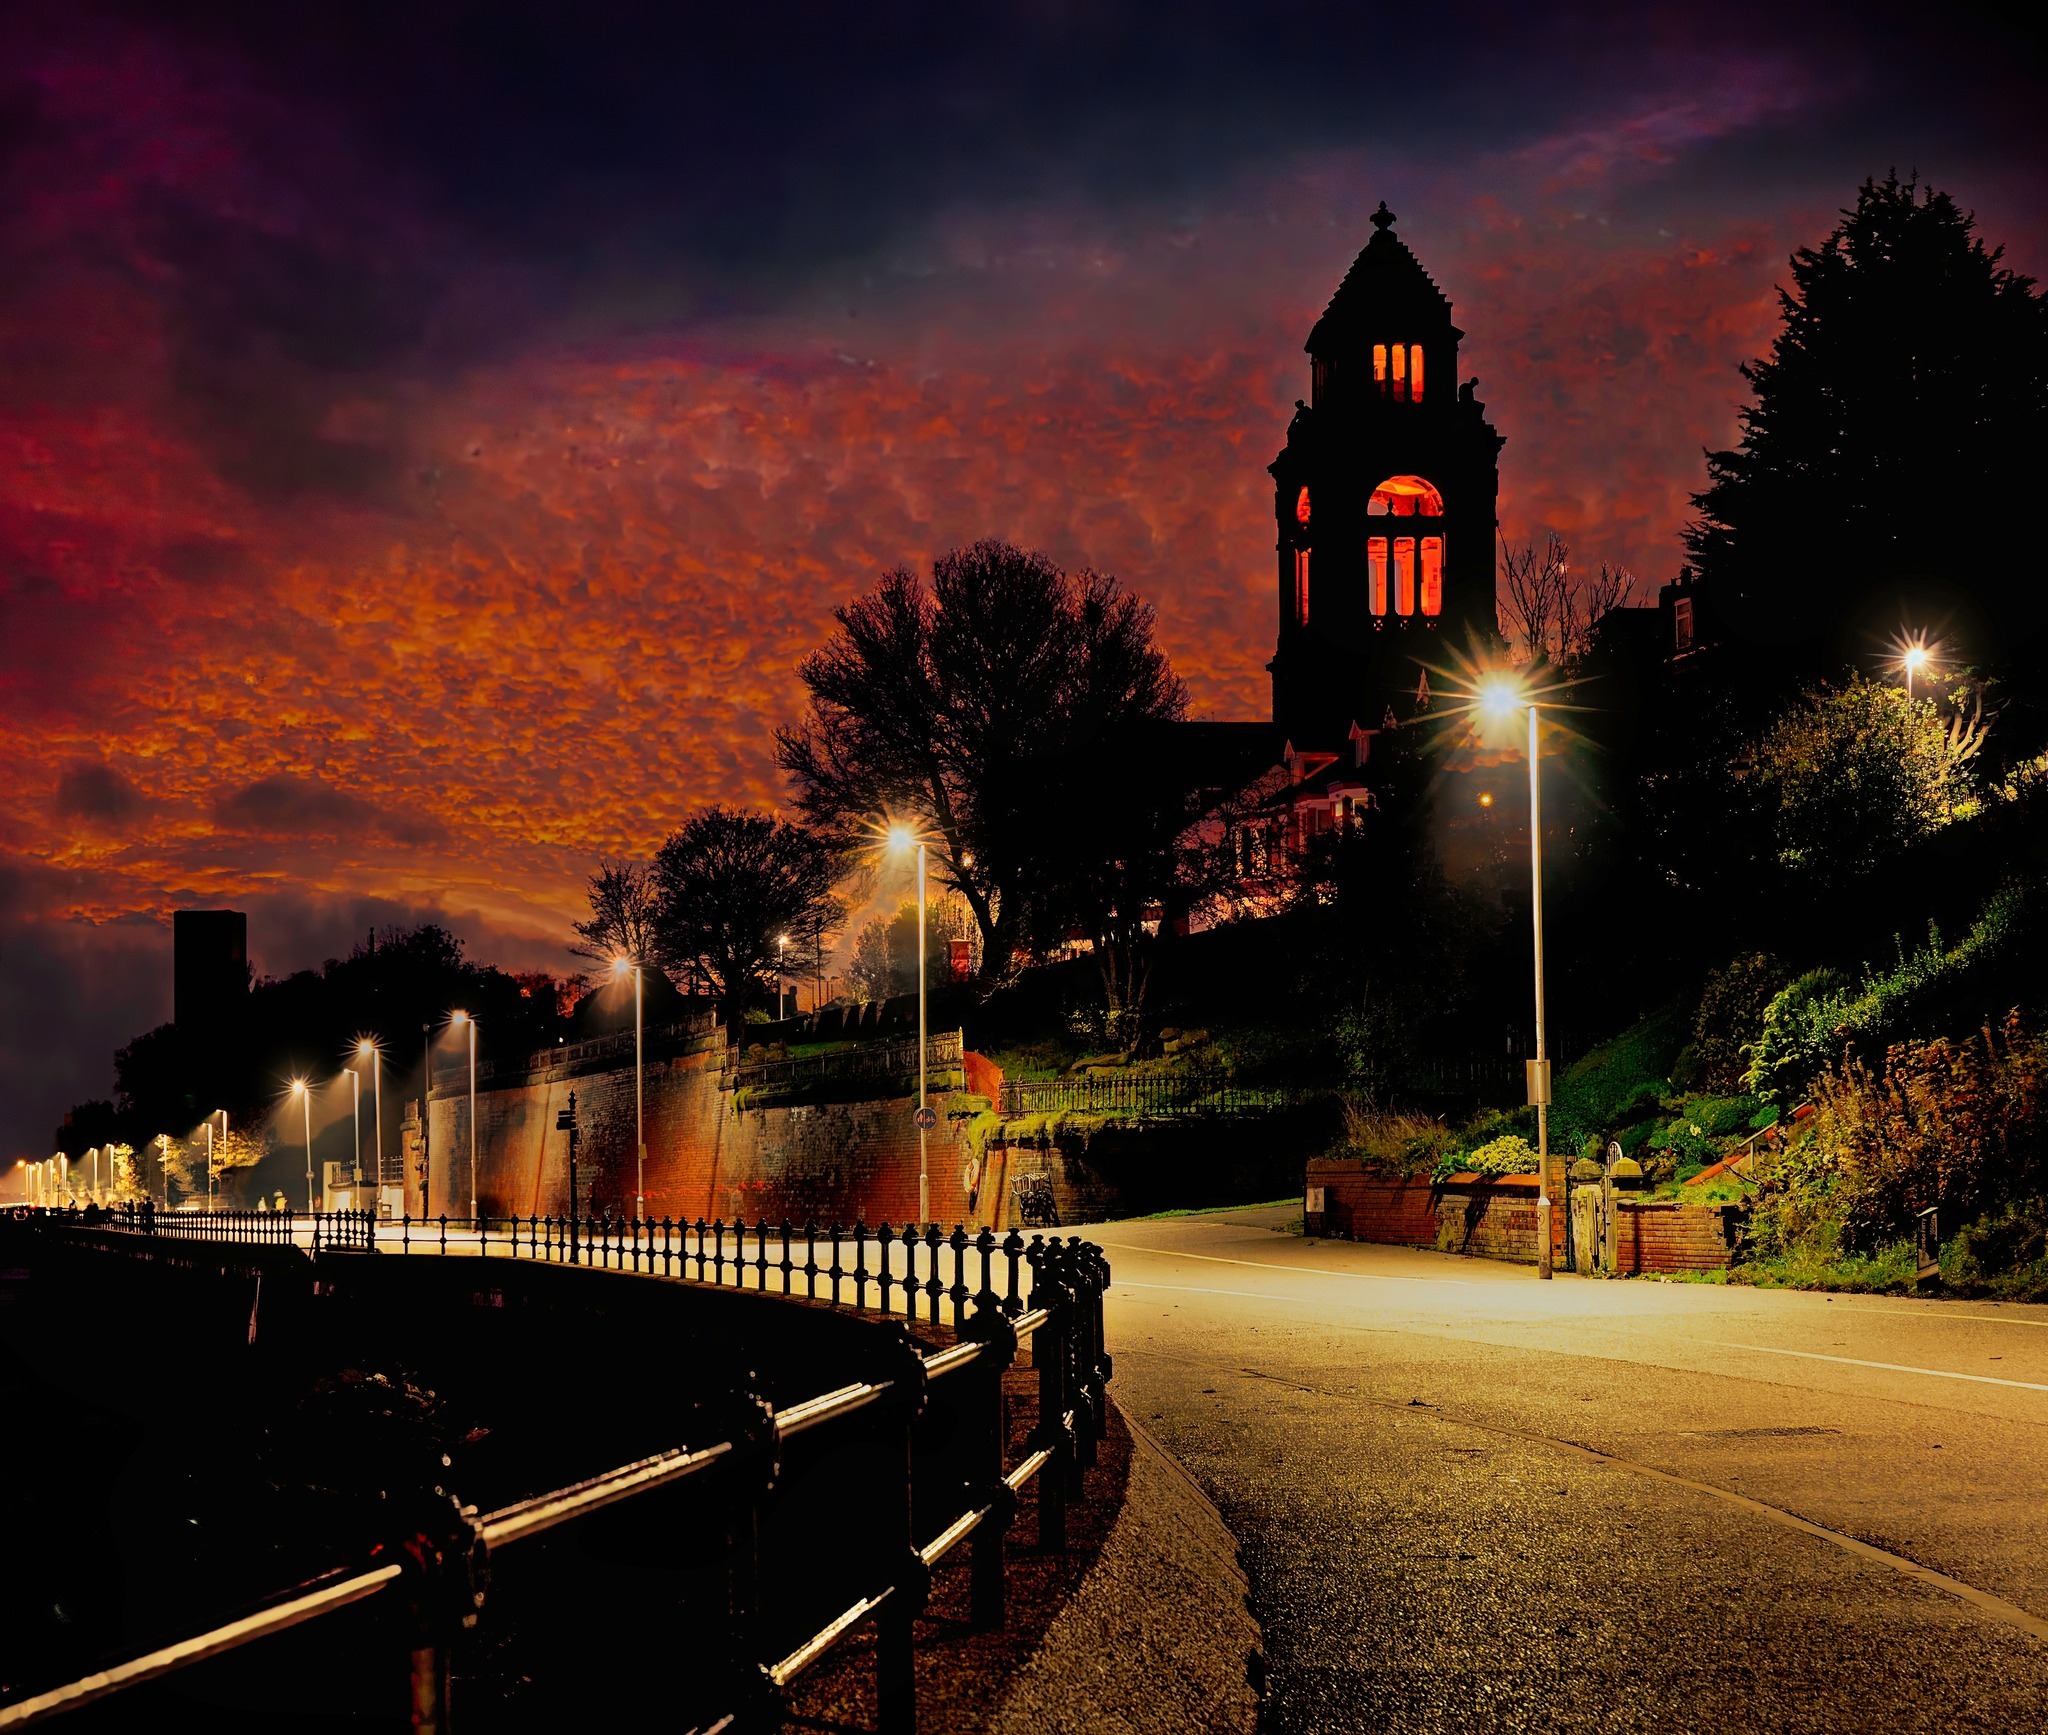 The end of the day, Wallasey Town Hall by Barry Brown